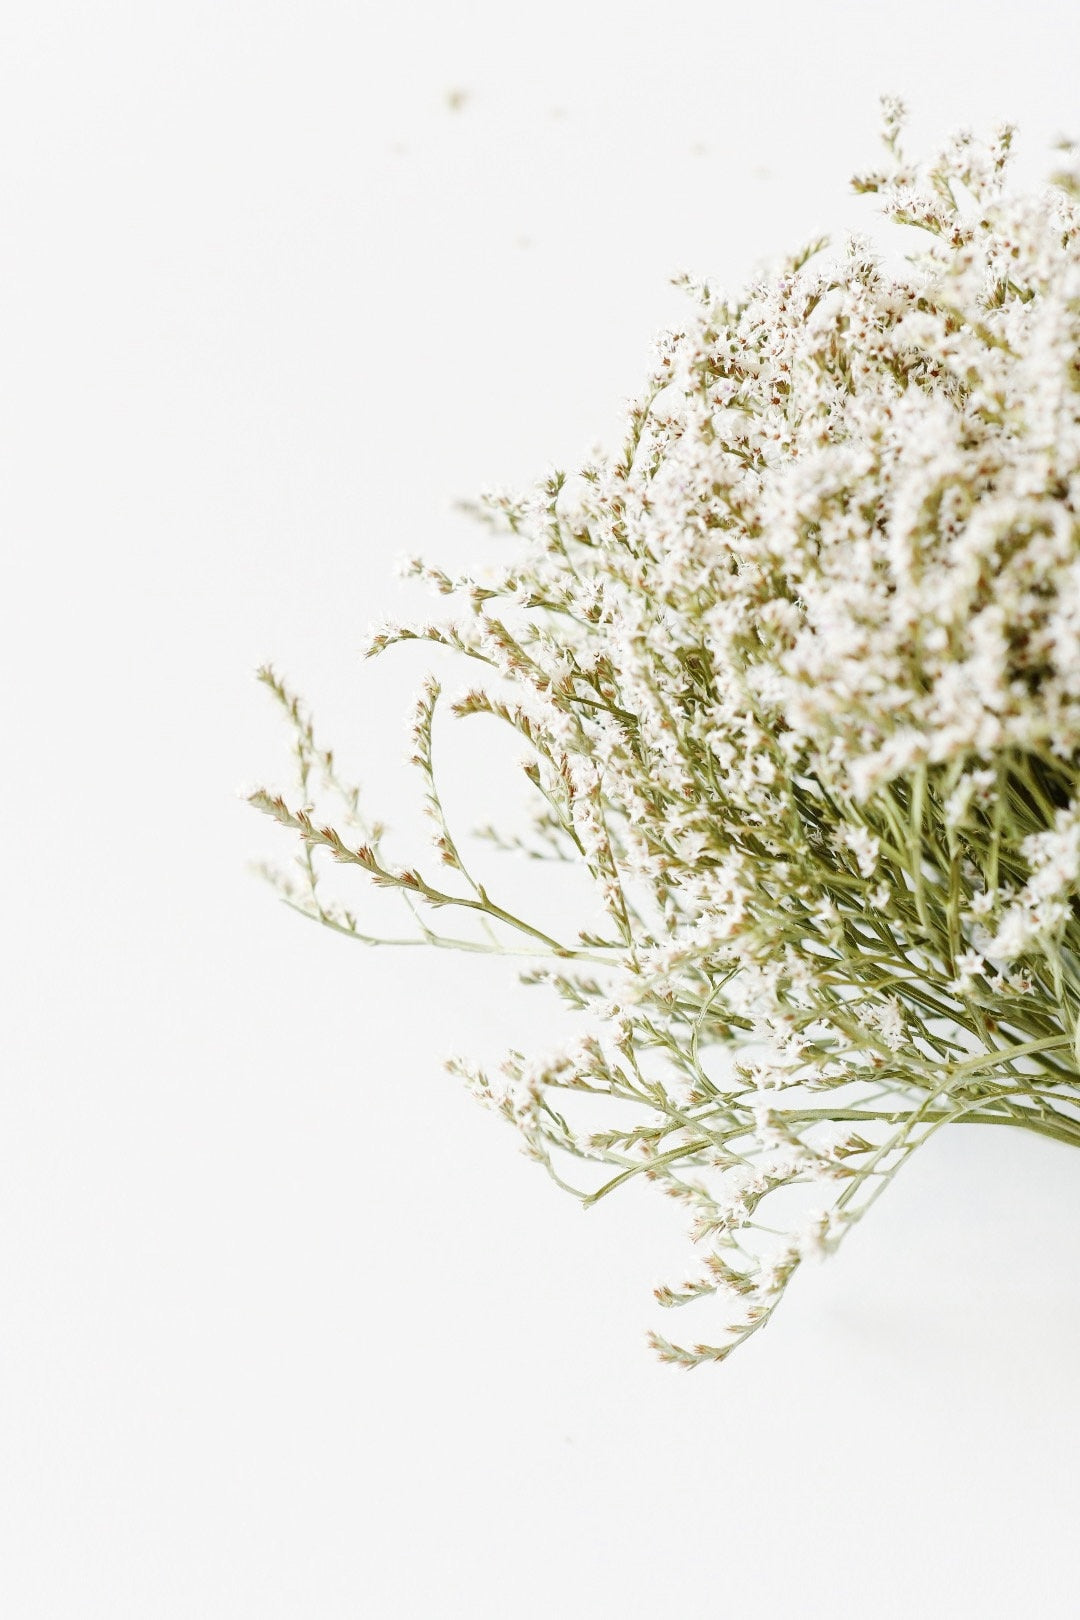 German Statice, Dry Flowers, White, Green, Wedding Bouquet, Floral Supply, Home Decor, Dried Wreath, Wildflowers Bunch, Farmhouse, Star